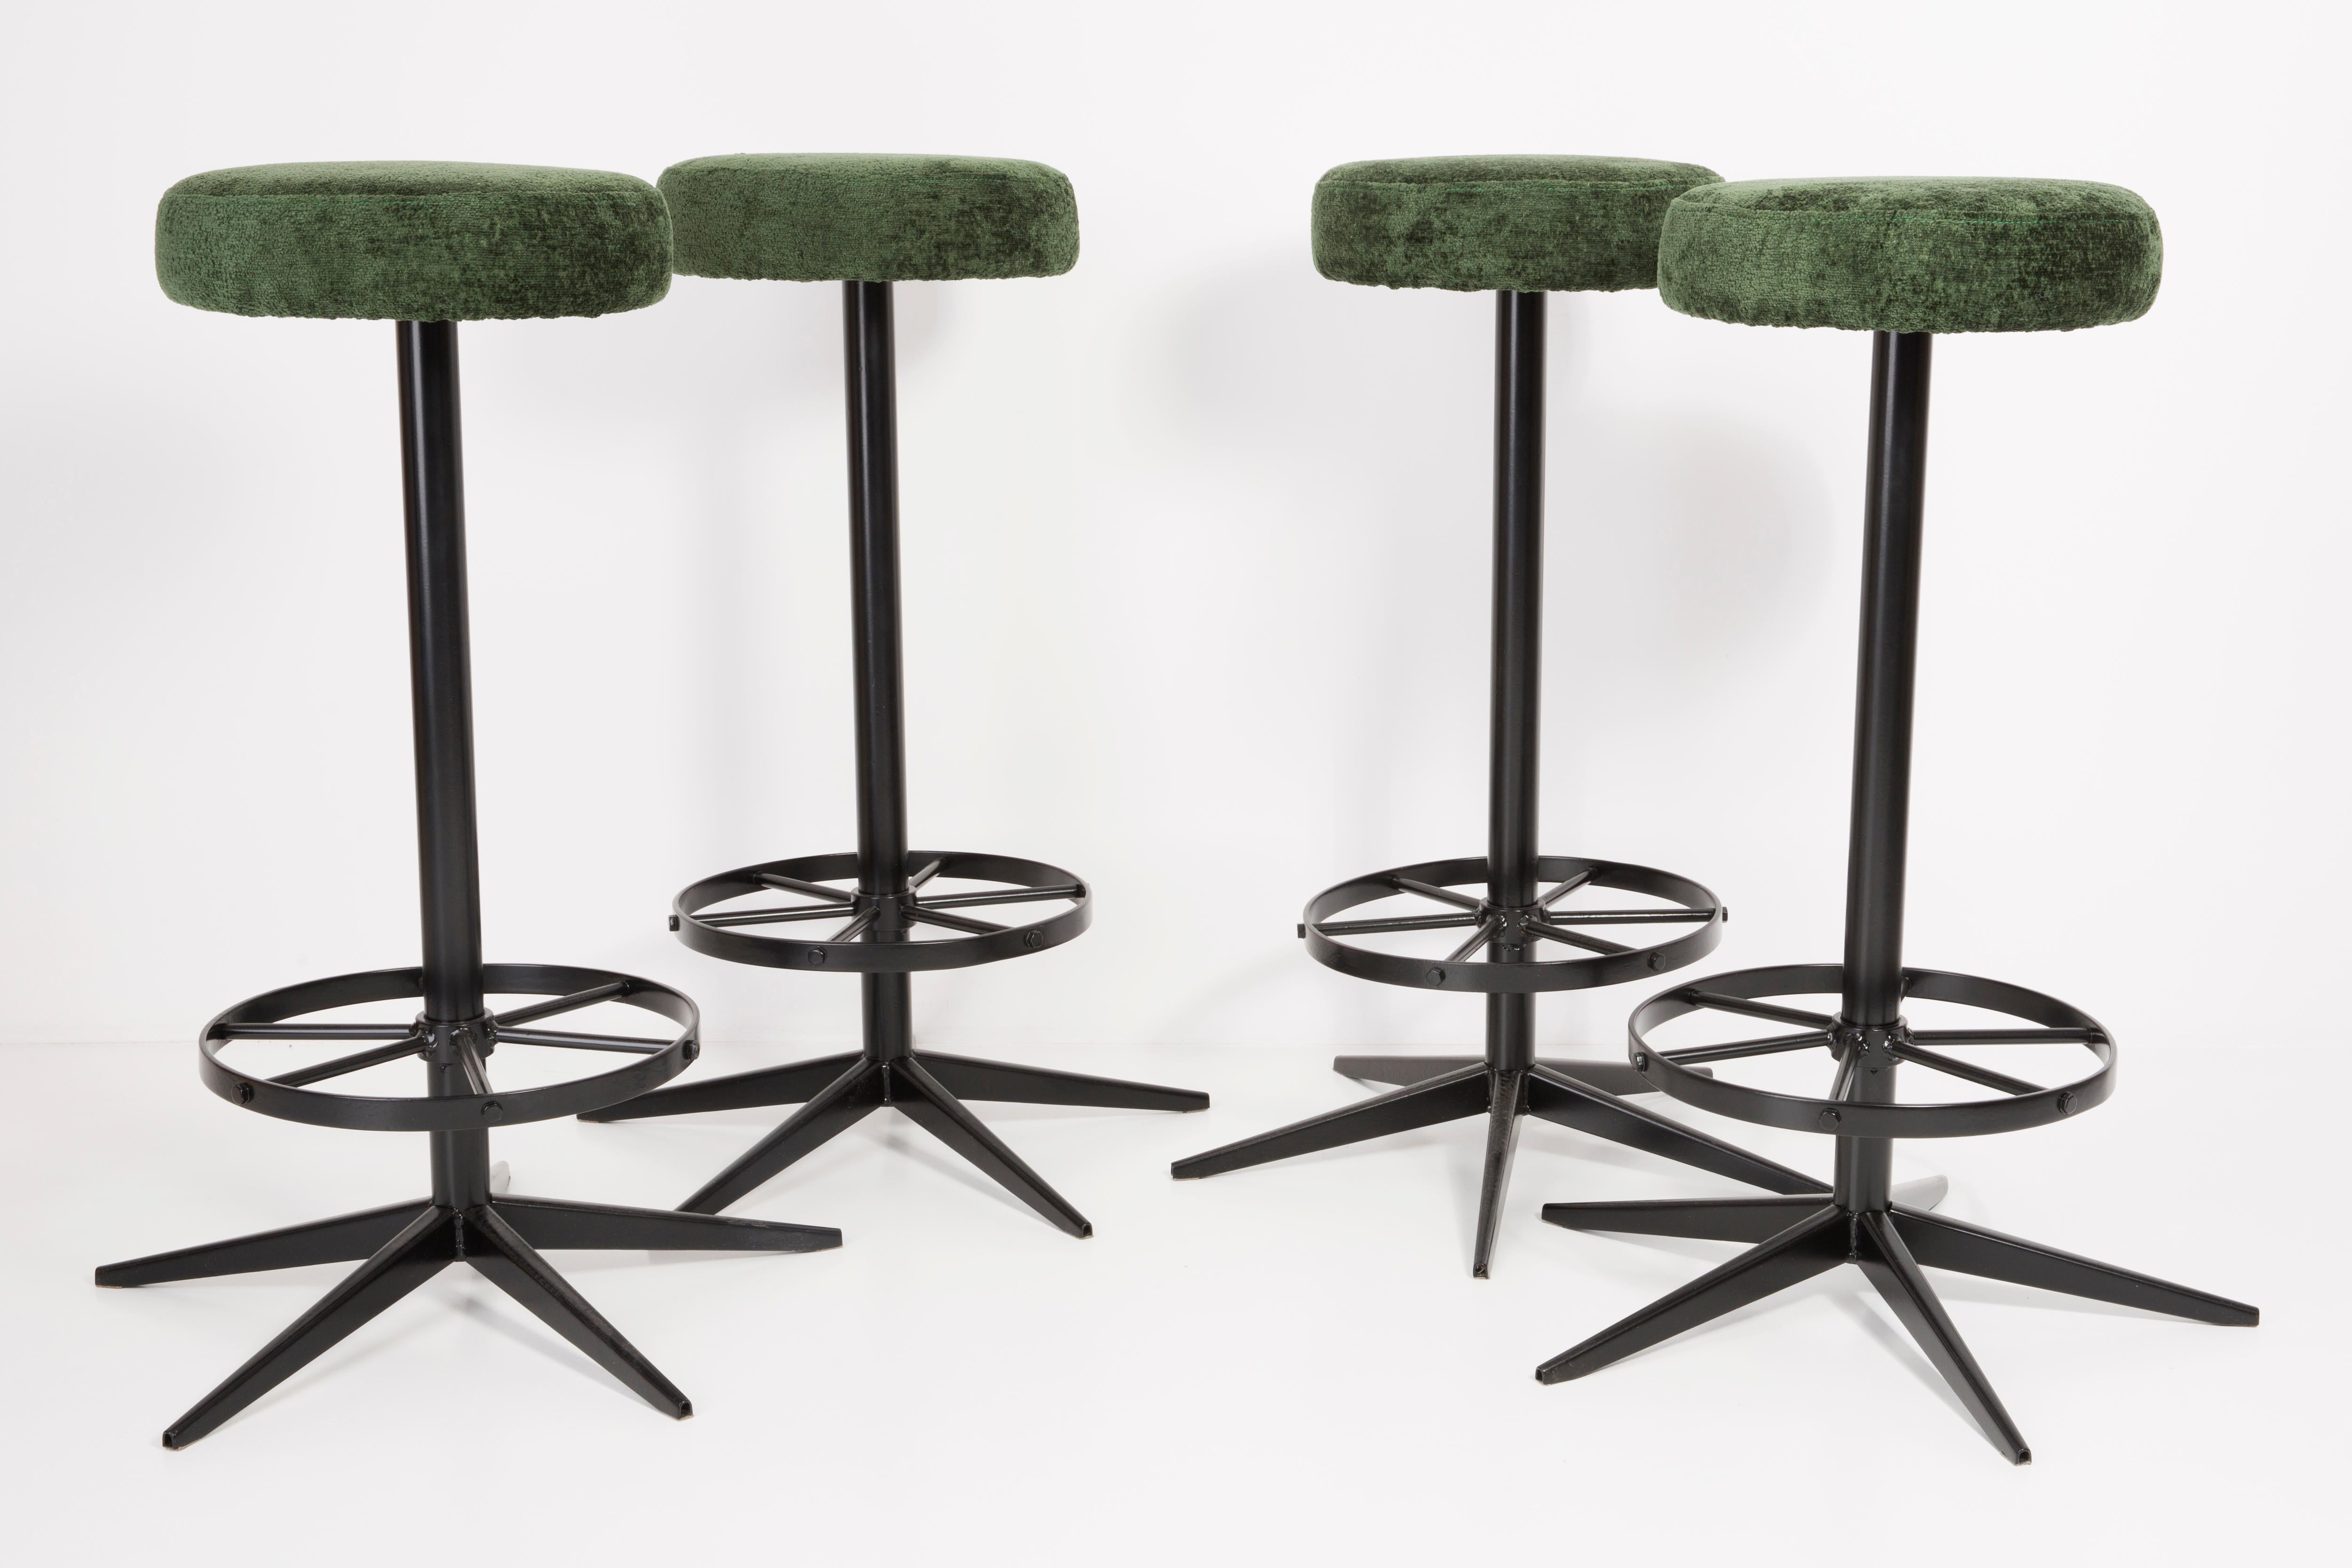 Stools from the turn of the 1960s. Produced in Germany. Beautiful, well crafted dark green italian upholstery. The stools consists of an upholstered part, a seat and steel black legs. They are not regulated. The height is constant.